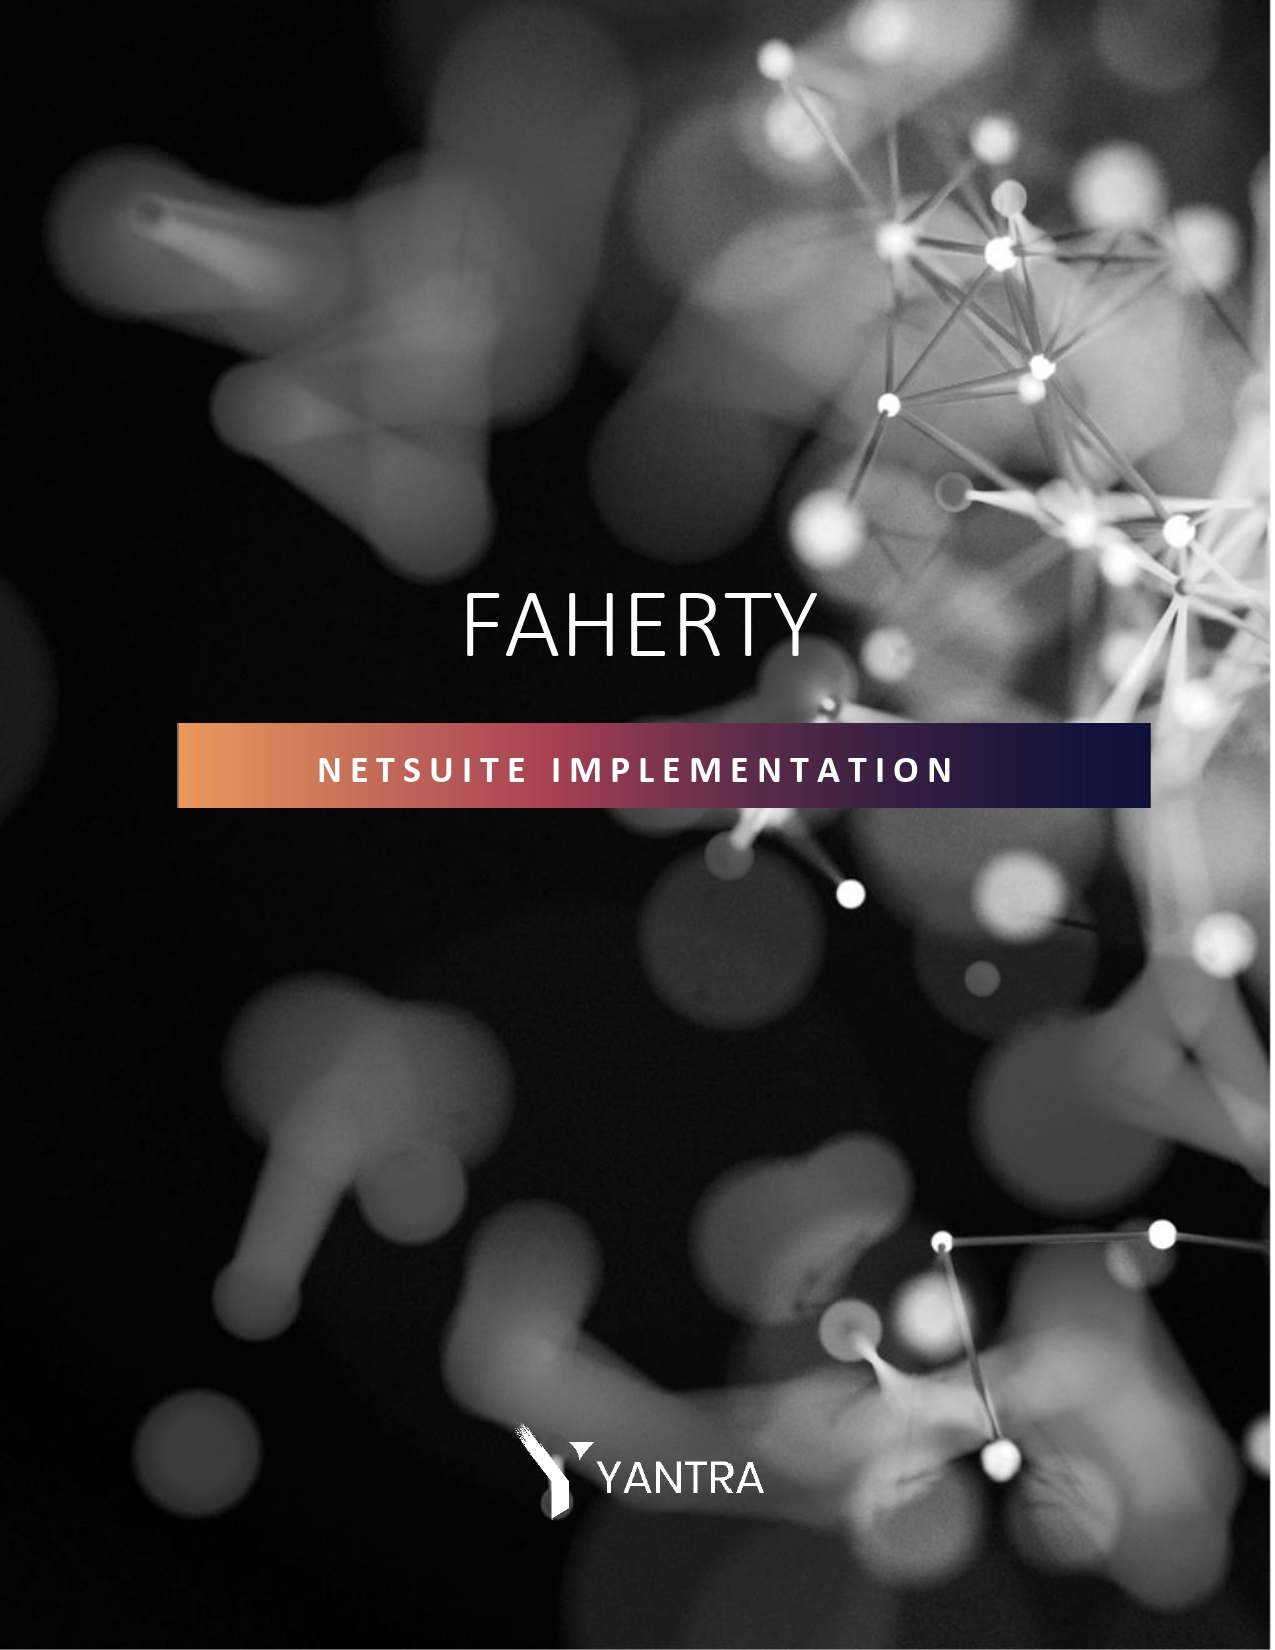 Faherty Netsuite Implementation